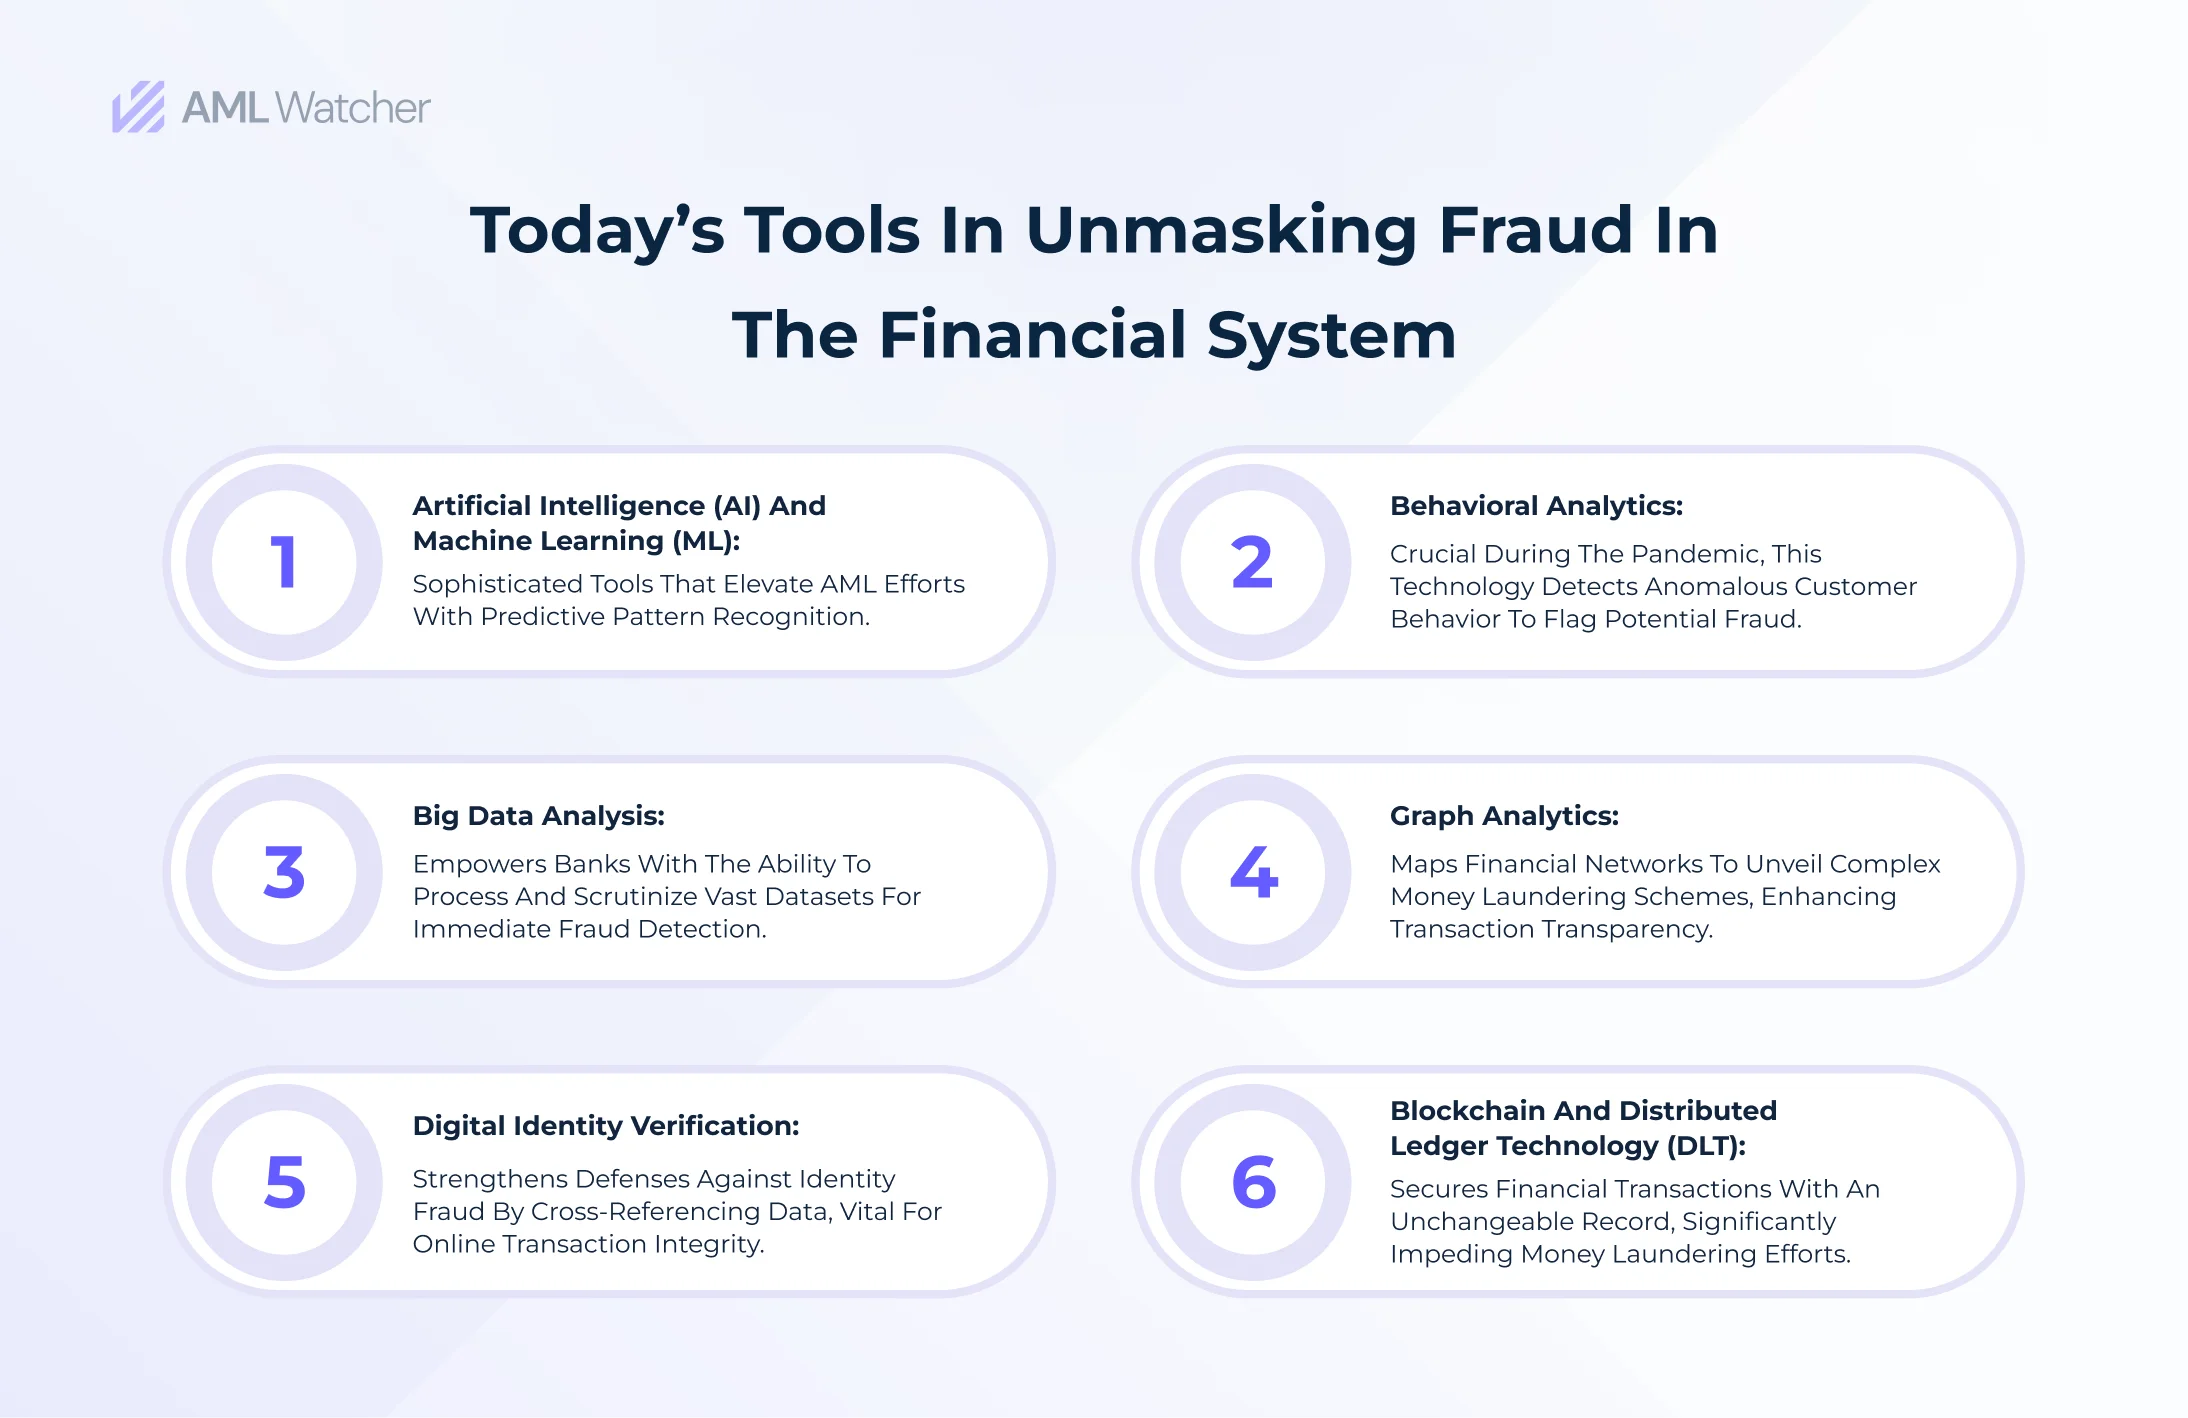 Unveiling AI, Analytics, Digital IDV, and Blockchain as keys to combating unidentifiable financial fraud and enhancing AML tactics.